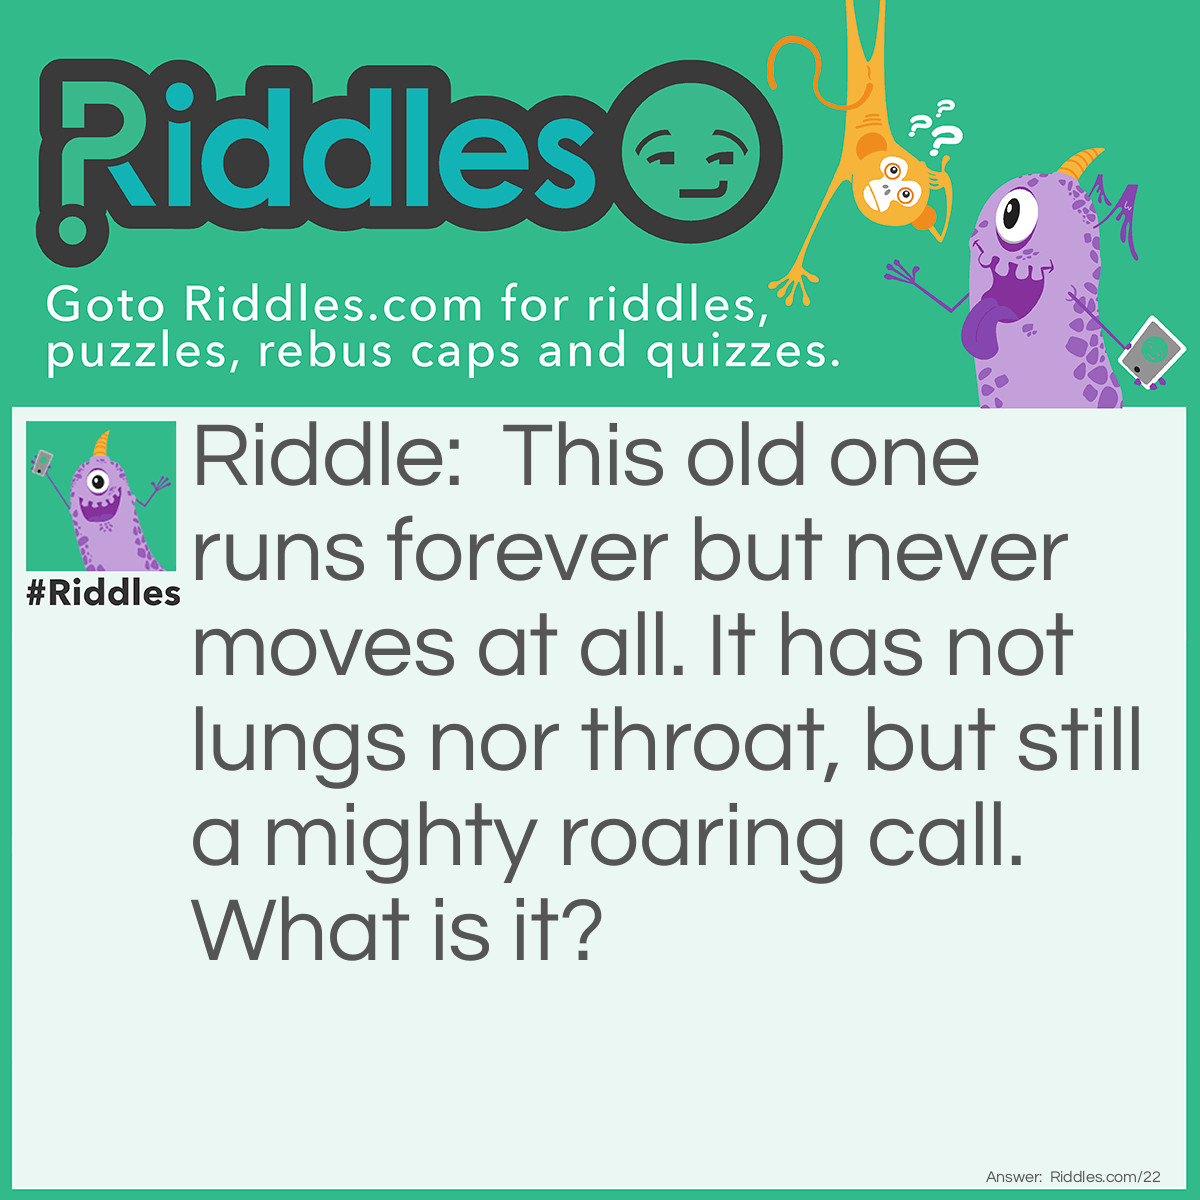 Riddle: This old one runs forever, but never moves at all. He has not lungs nor throat, but still a mighty roaring call. What is it? Answer: A Waterfall.